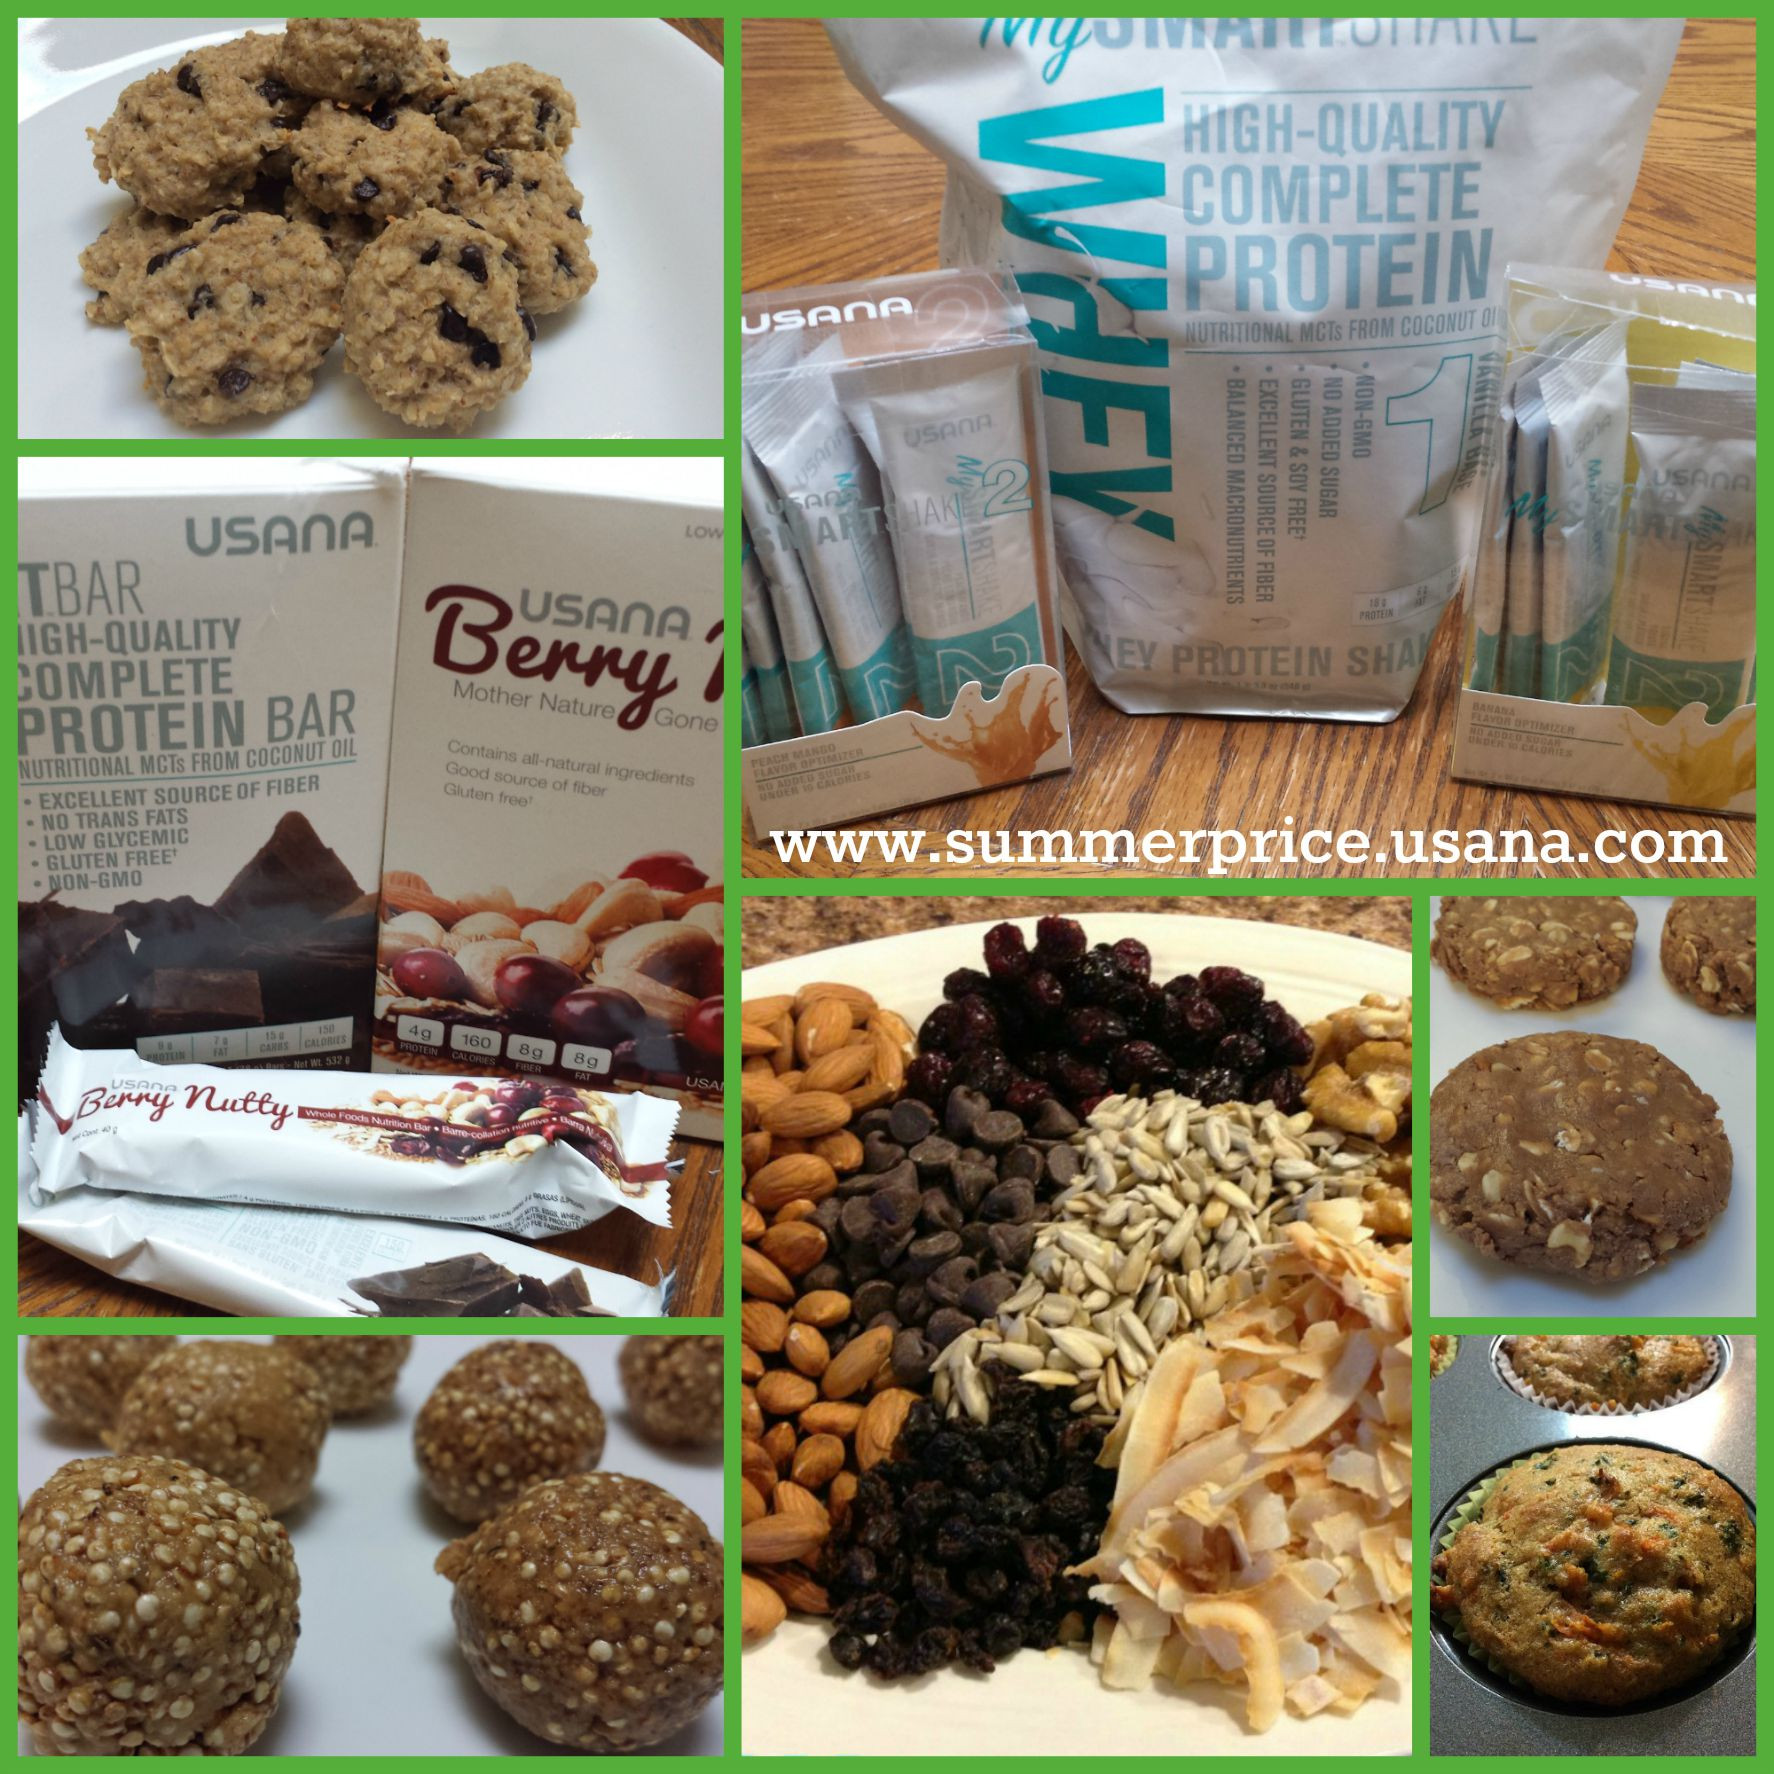 Healthy High Protein Snacks
 10 Healthy & Portable High Protein Snacks Summer Price